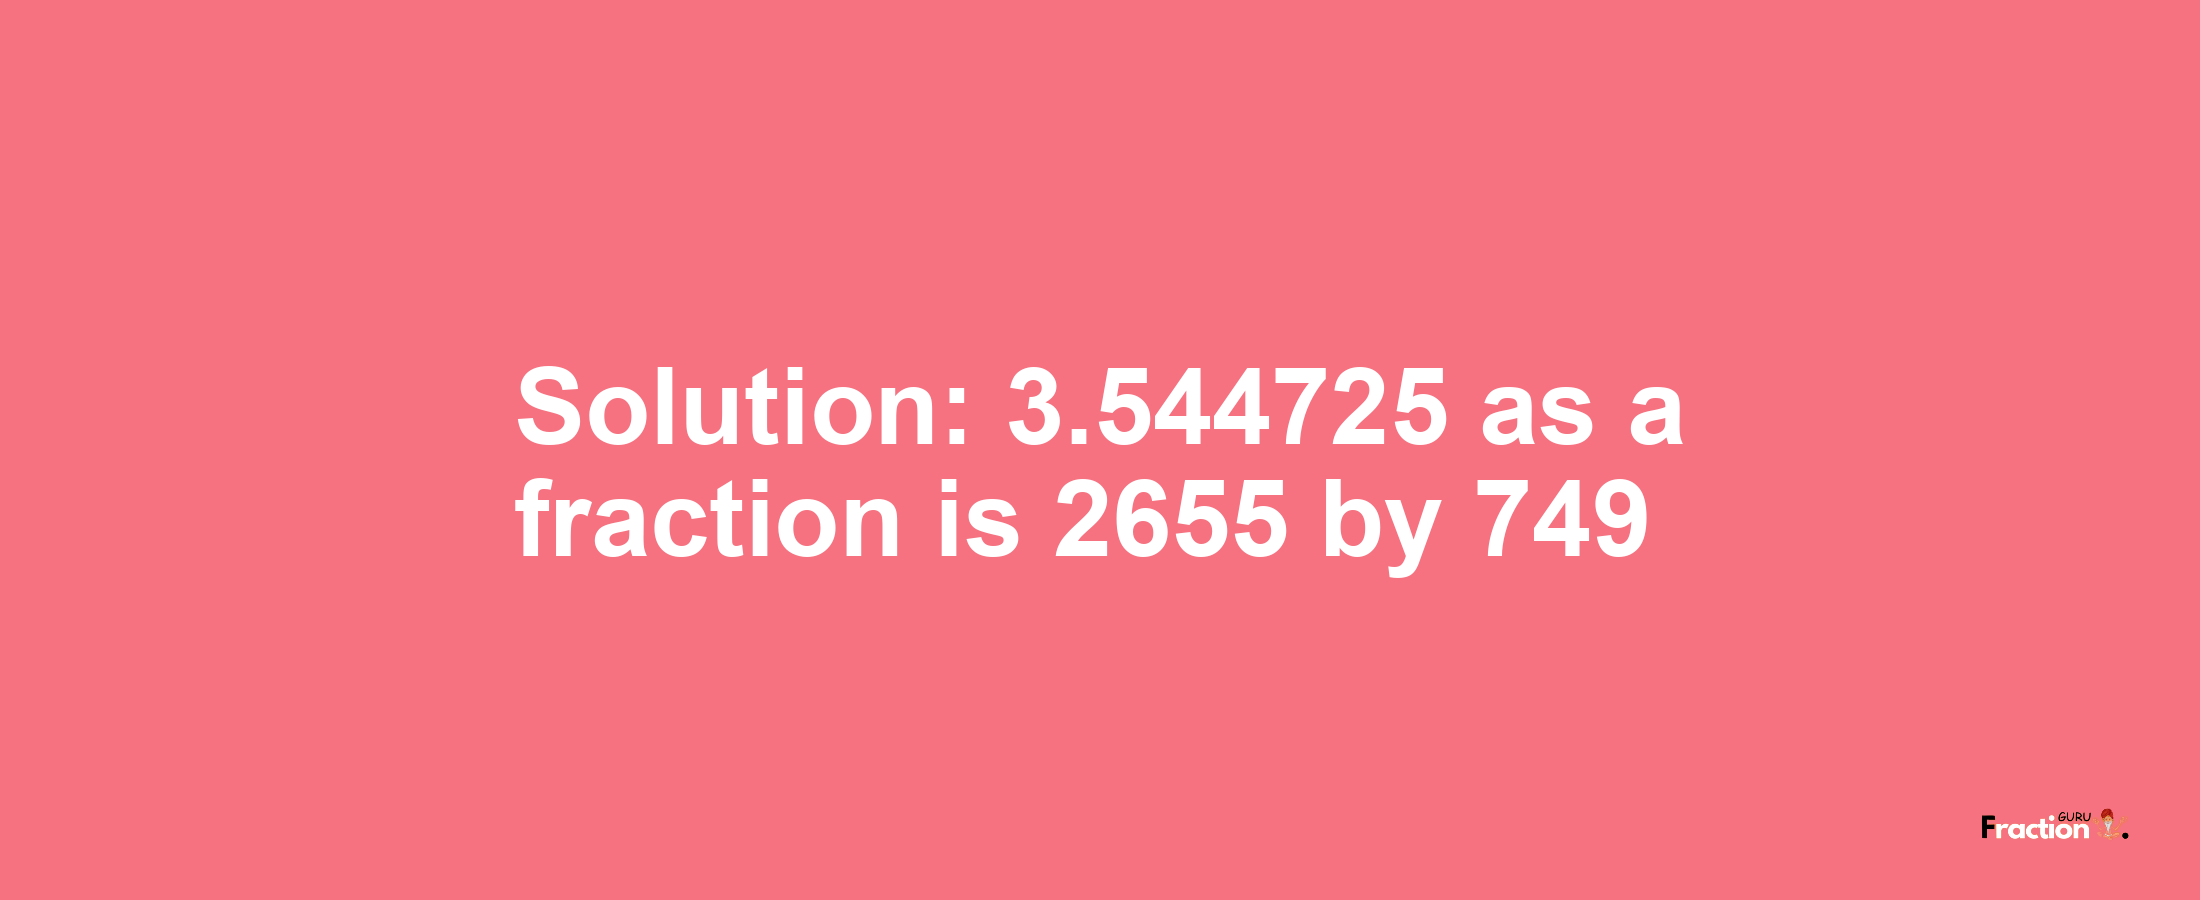 Solution:3.544725 as a fraction is 2655/749